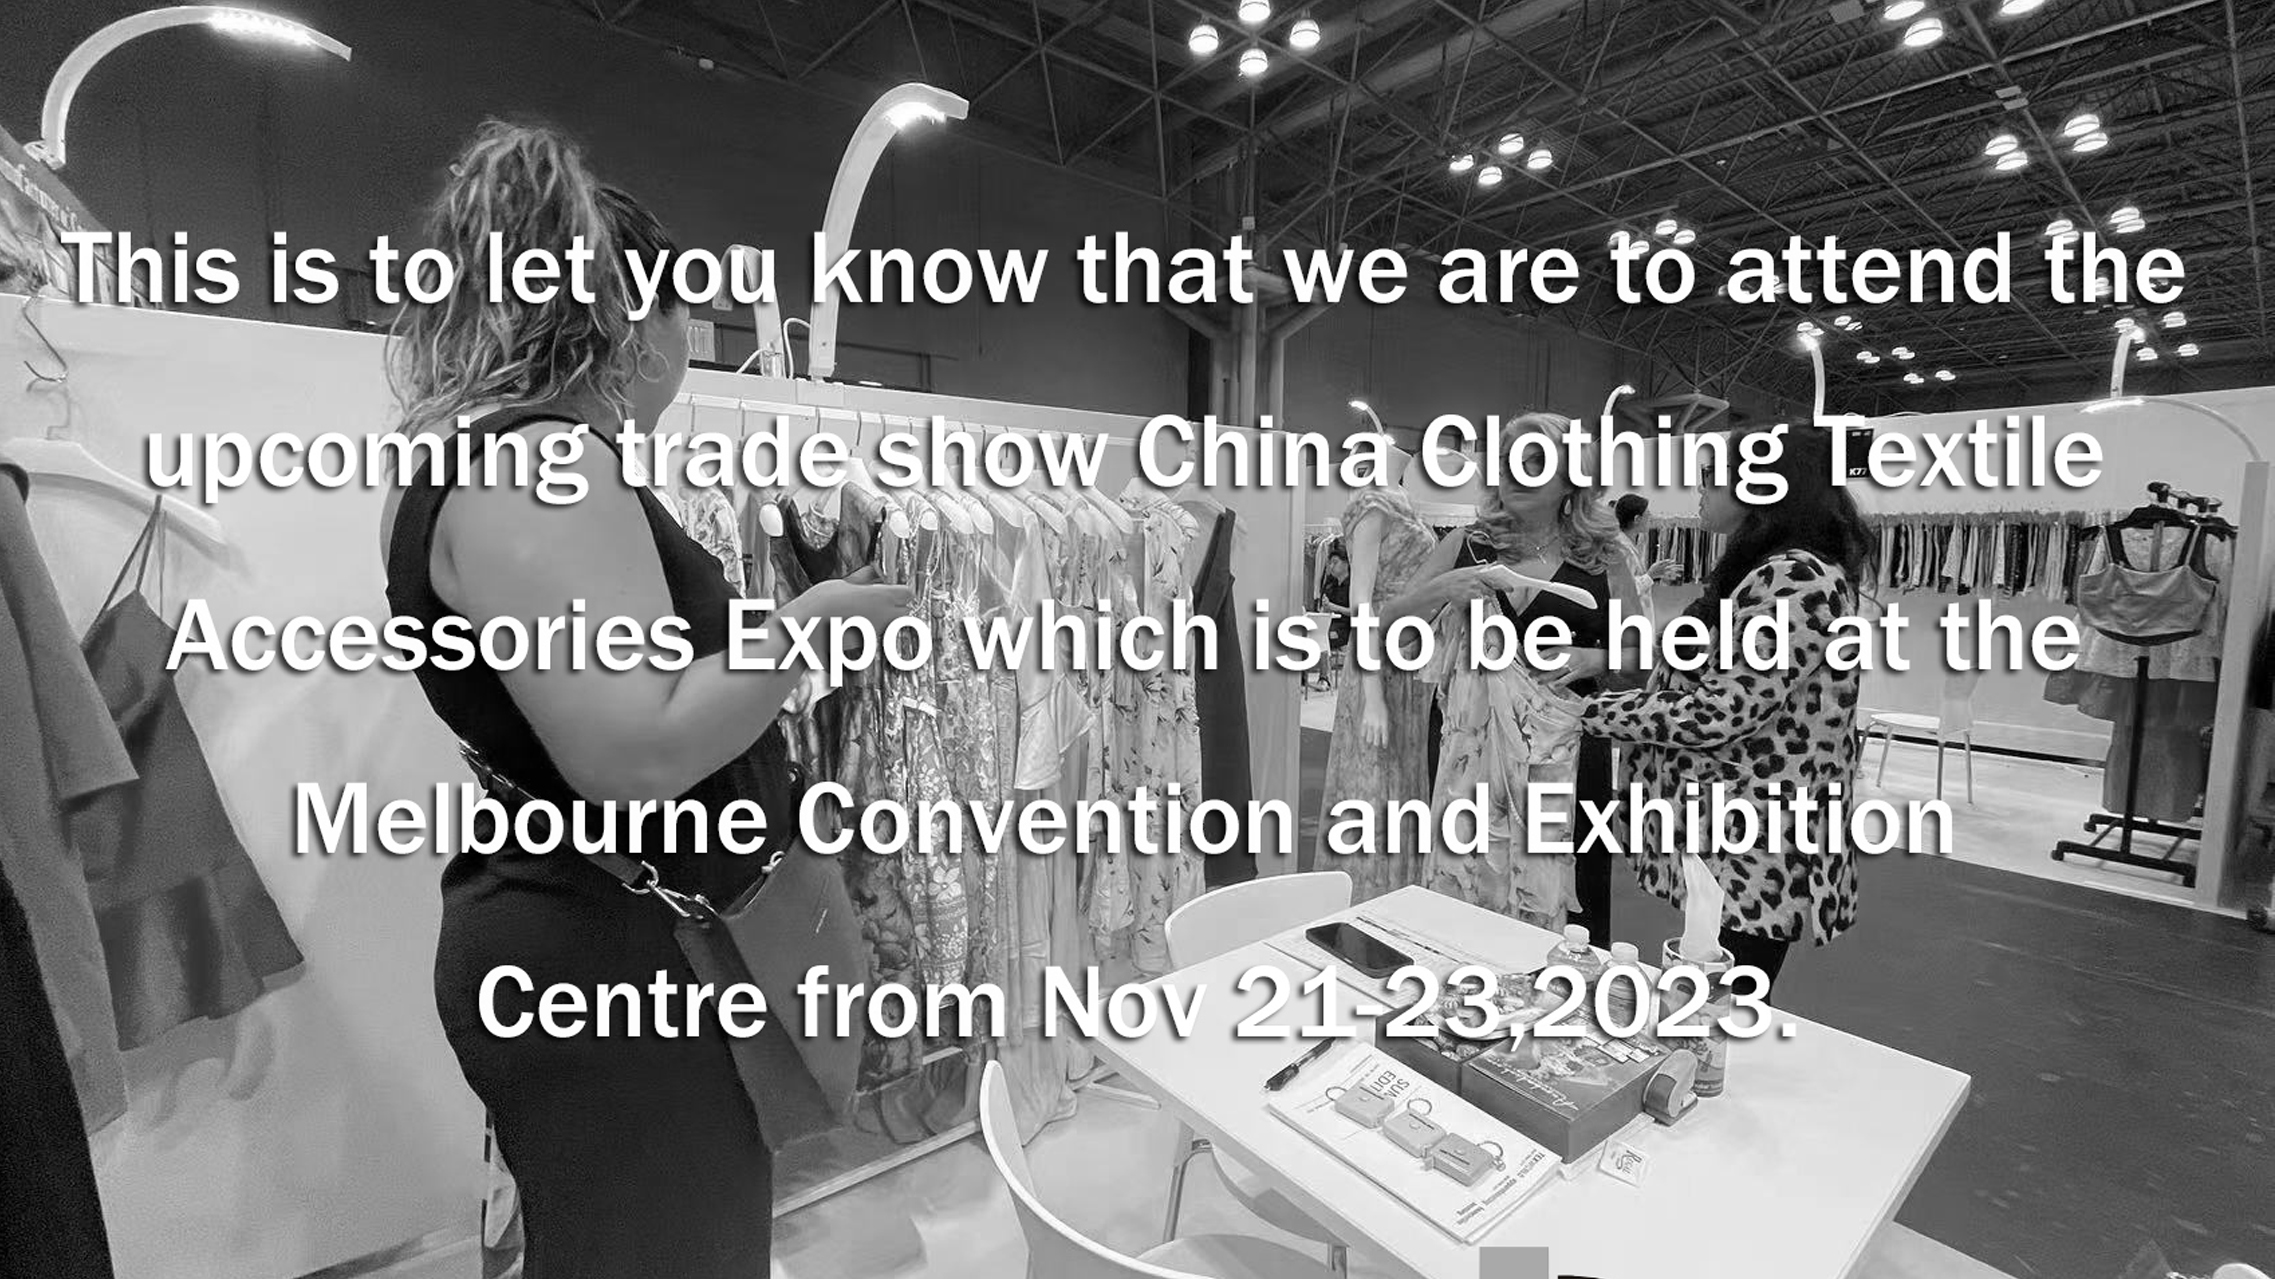 China Clothing Textile Accessories Expo in Melbourne